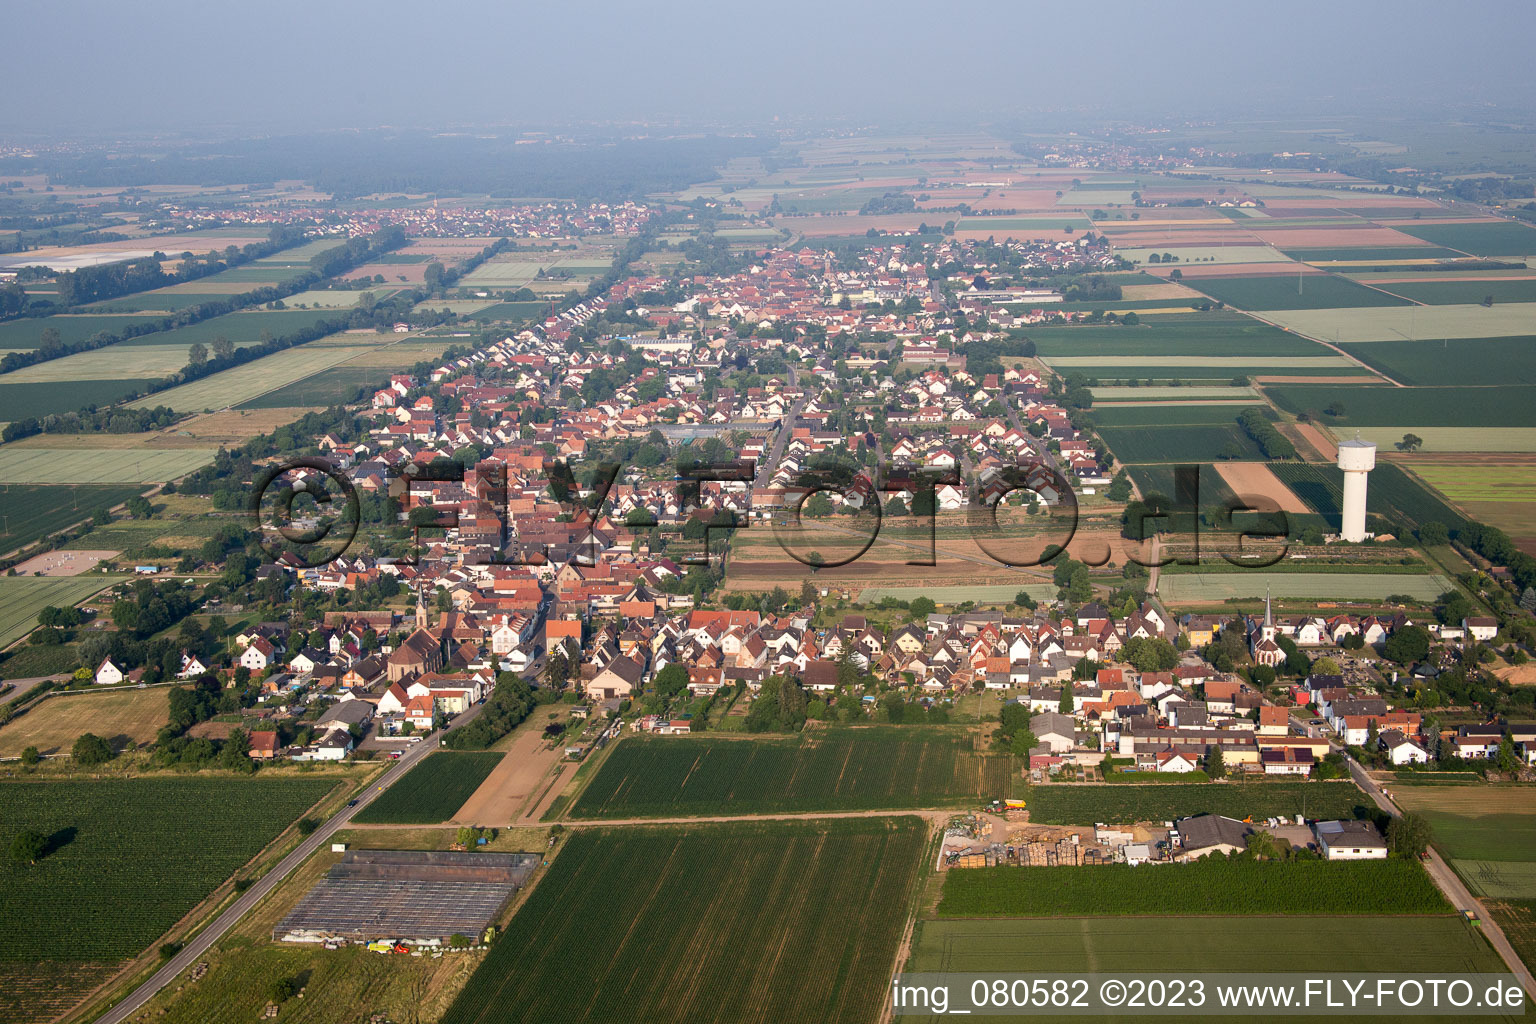 Aerial view of Lustadt in the state Rhineland-Palatinate, Germany